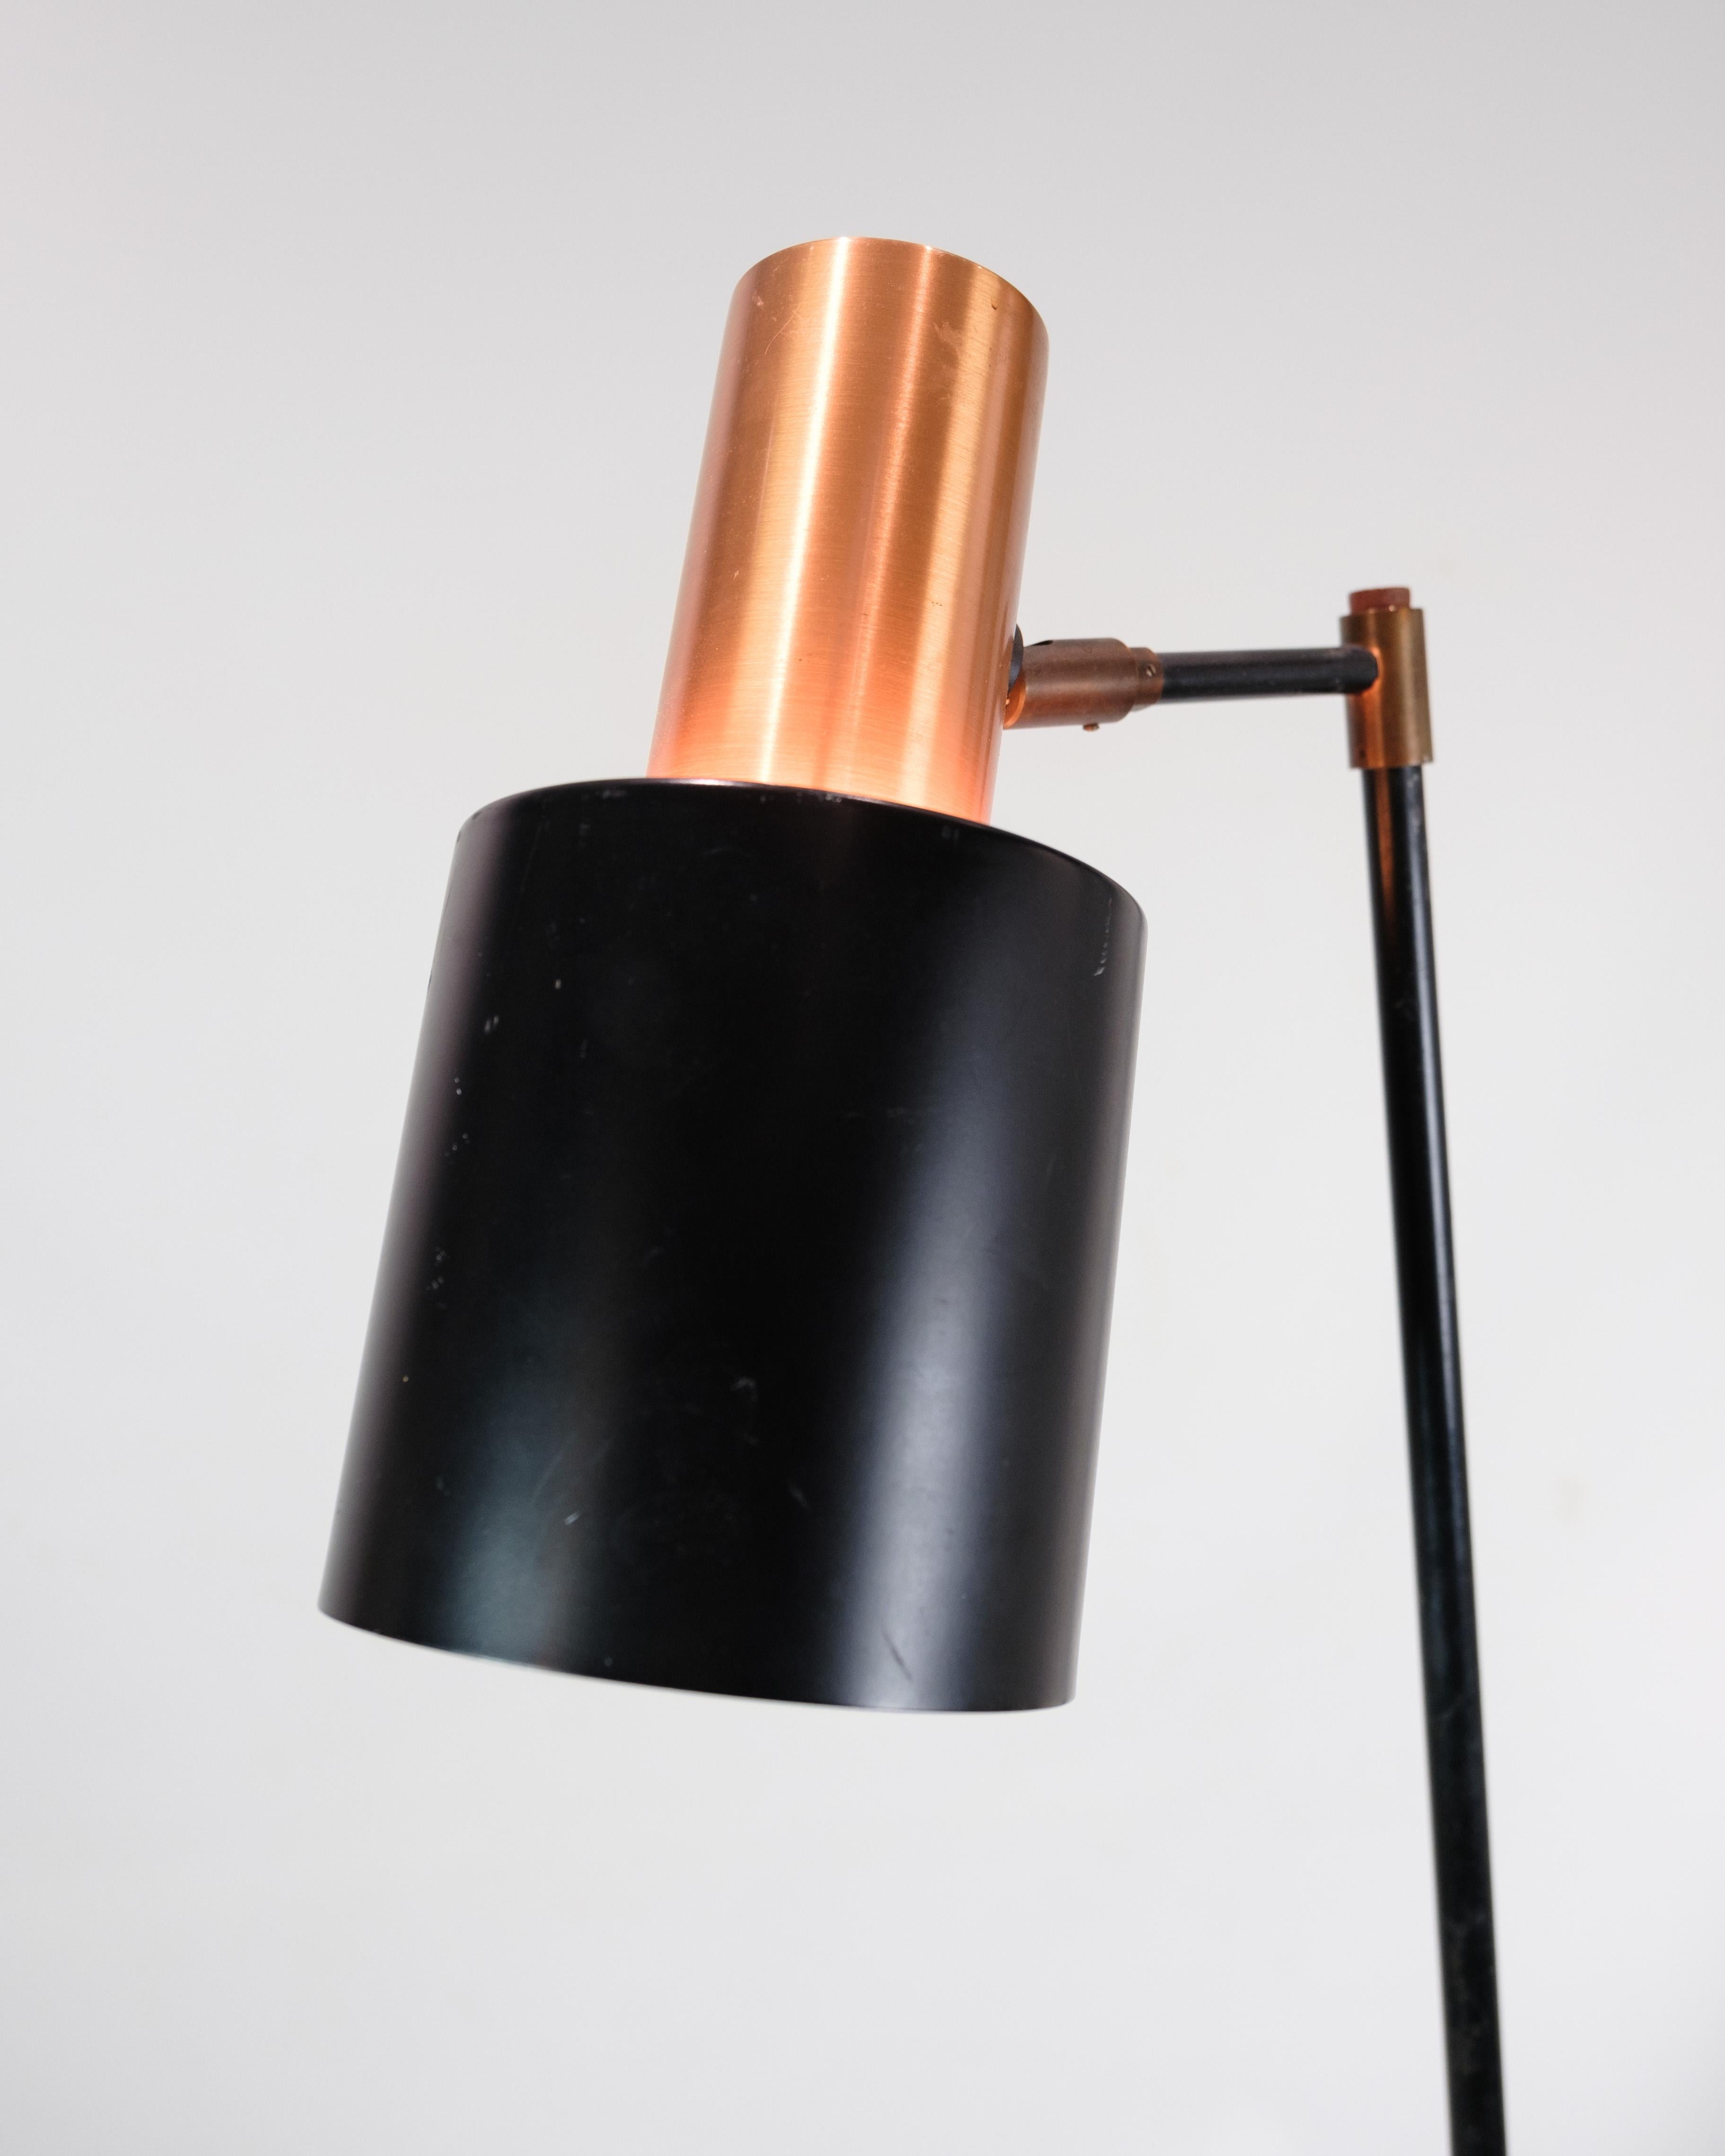 This floor lamp, known as Model Studio, is a beautiful example of Danish lighting design from the 1970s. The lamp has a black lacquered metal stem with a copper colored base that adds a touch of elegance and warmth to any interior.

The shade of the